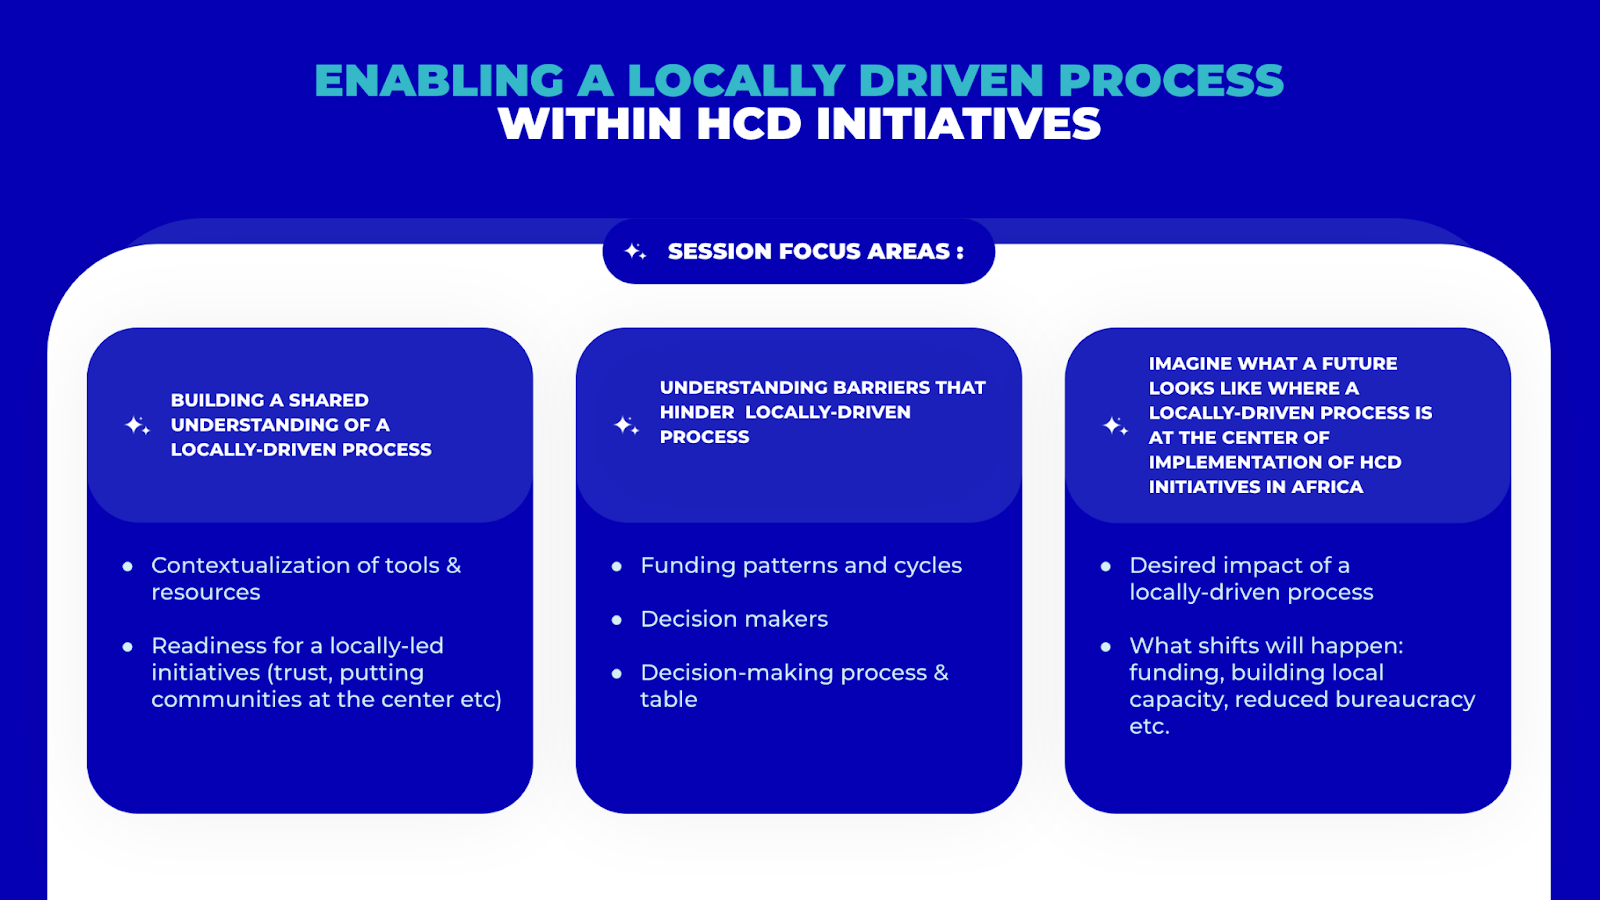 Enabling a locally driven process